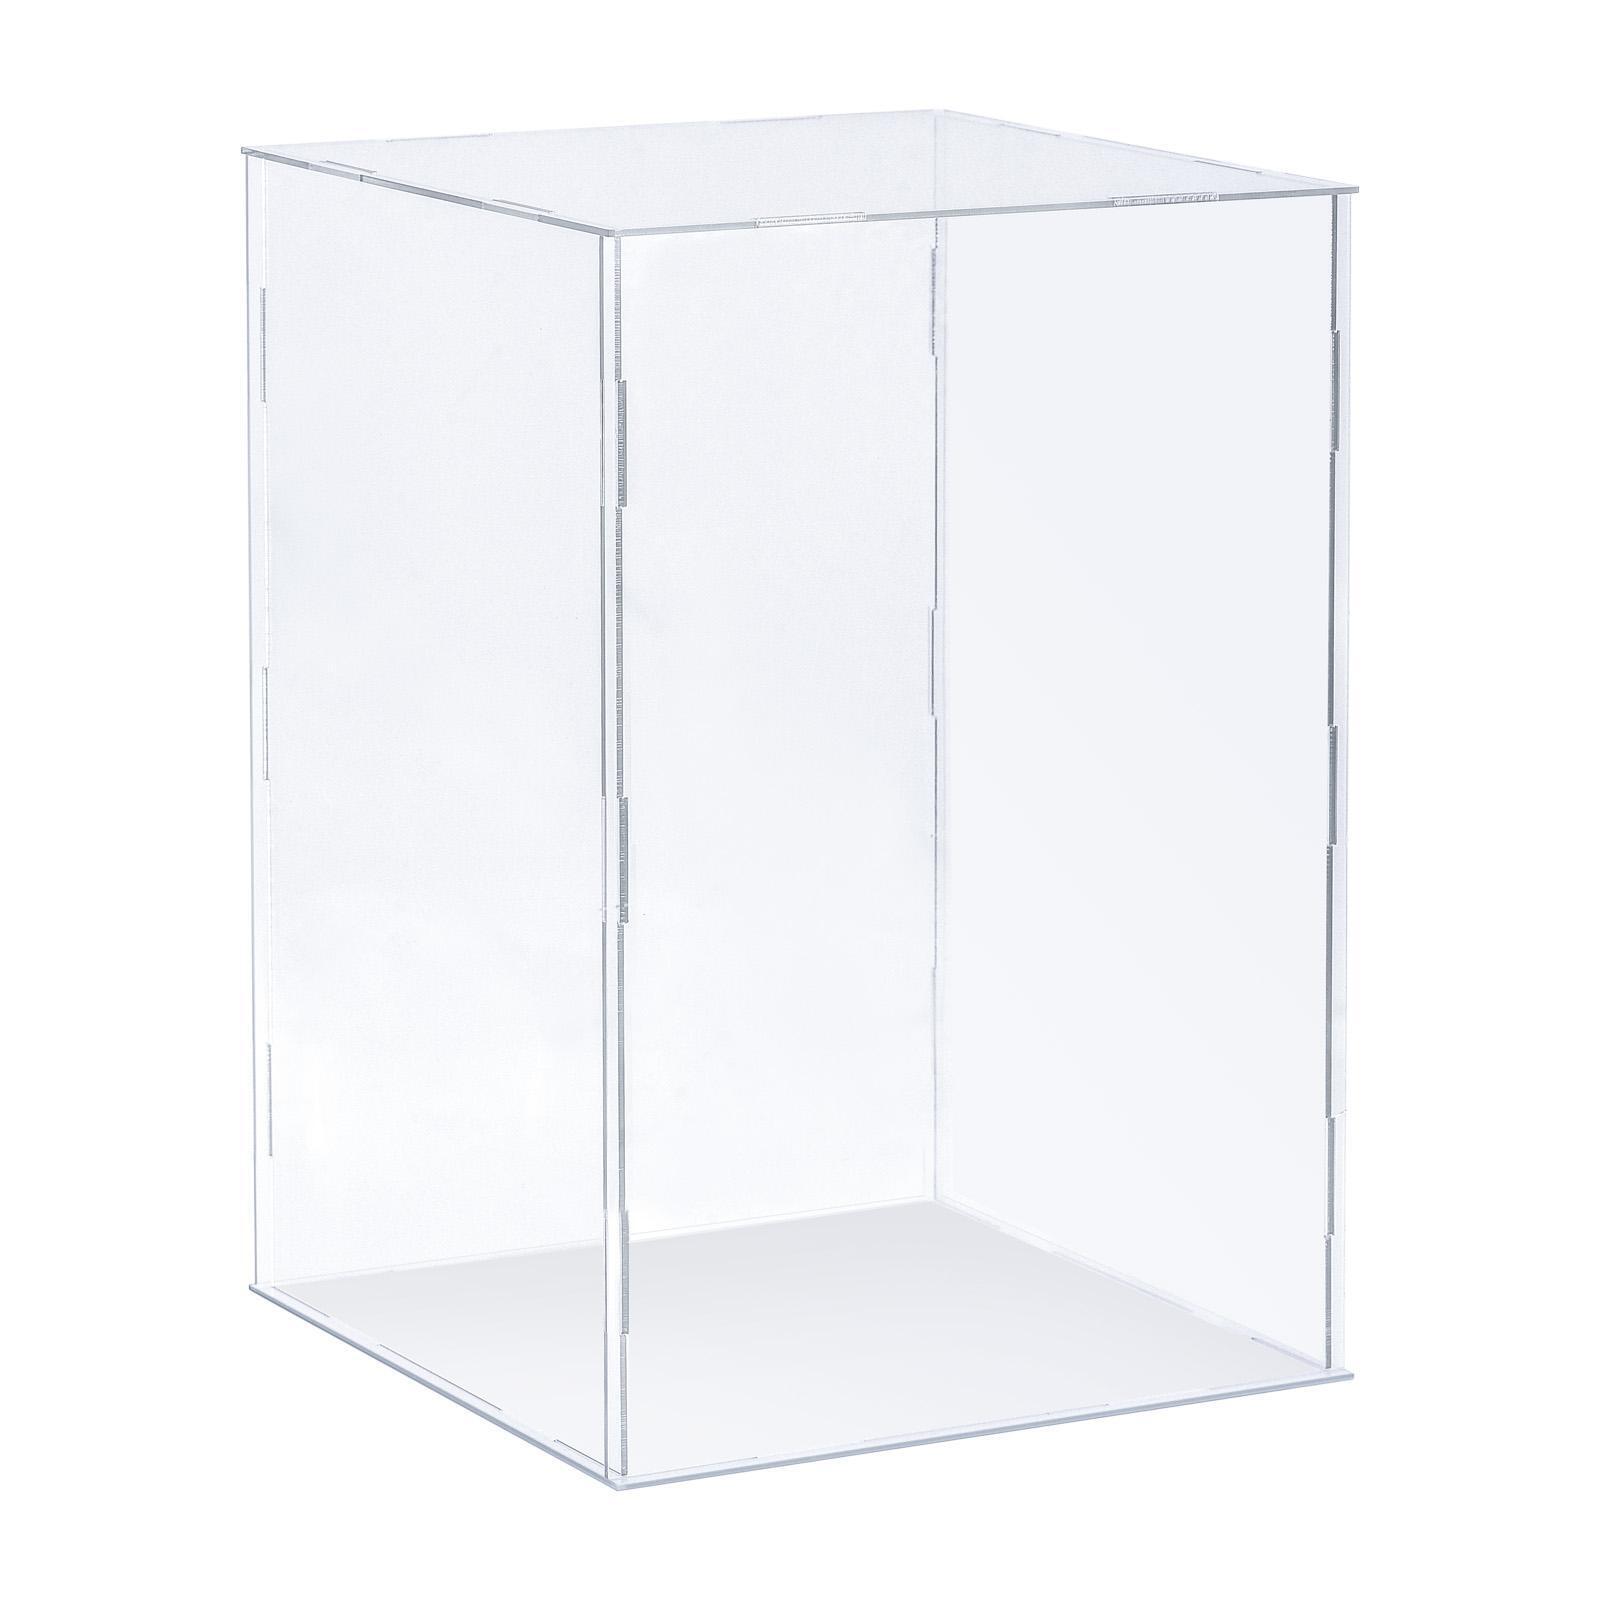 Clear Display Case Acrylic Box Assemble Box 25x25x40cm for Collectibles Crafts